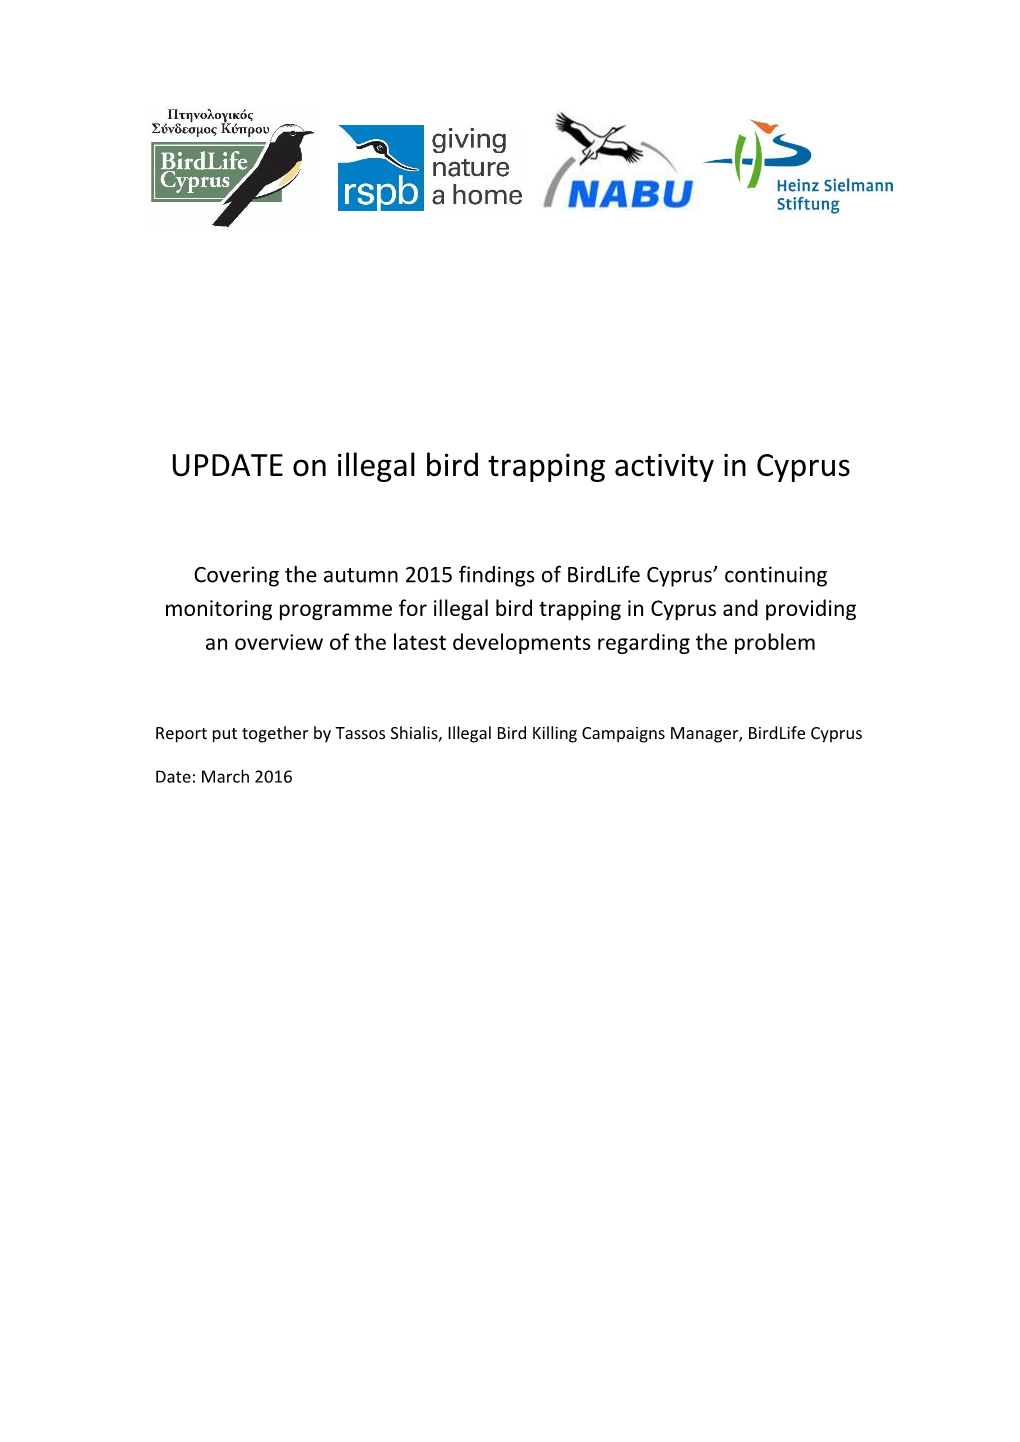 UPDATE on Illegal Bird Trapping Activity in Cyprus